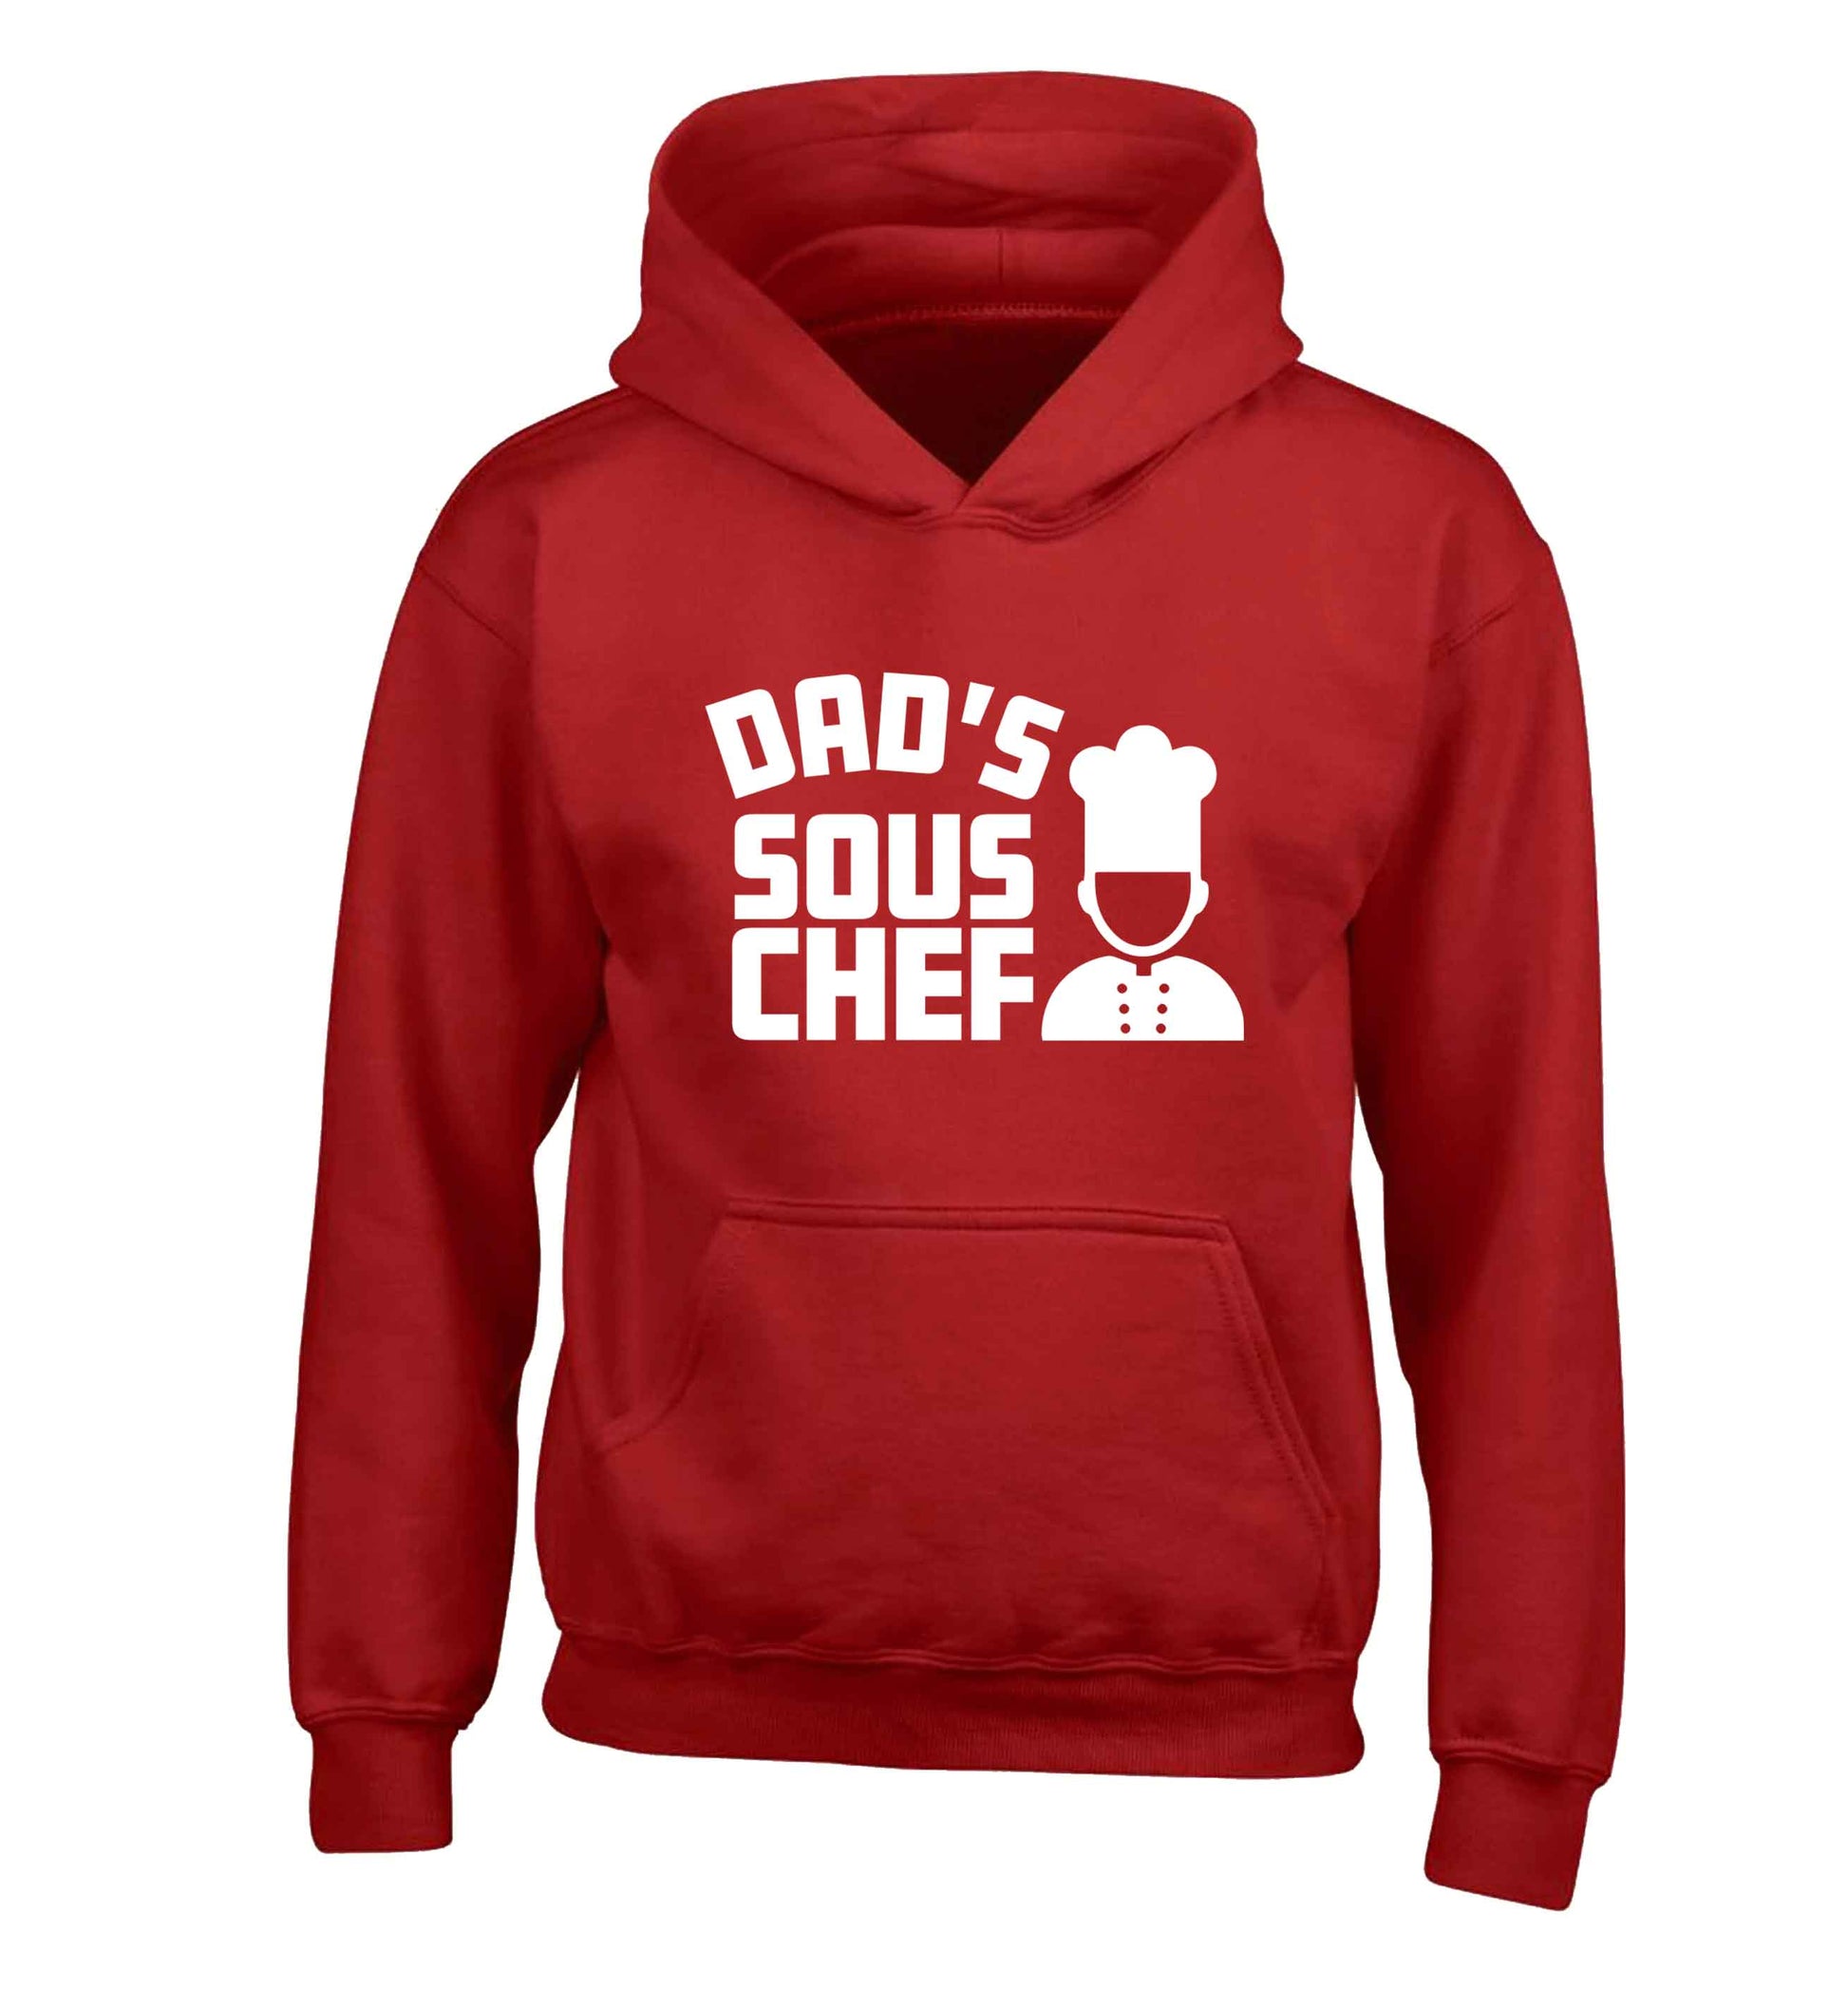 Dad's sous chef children's red hoodie 12-13 Years